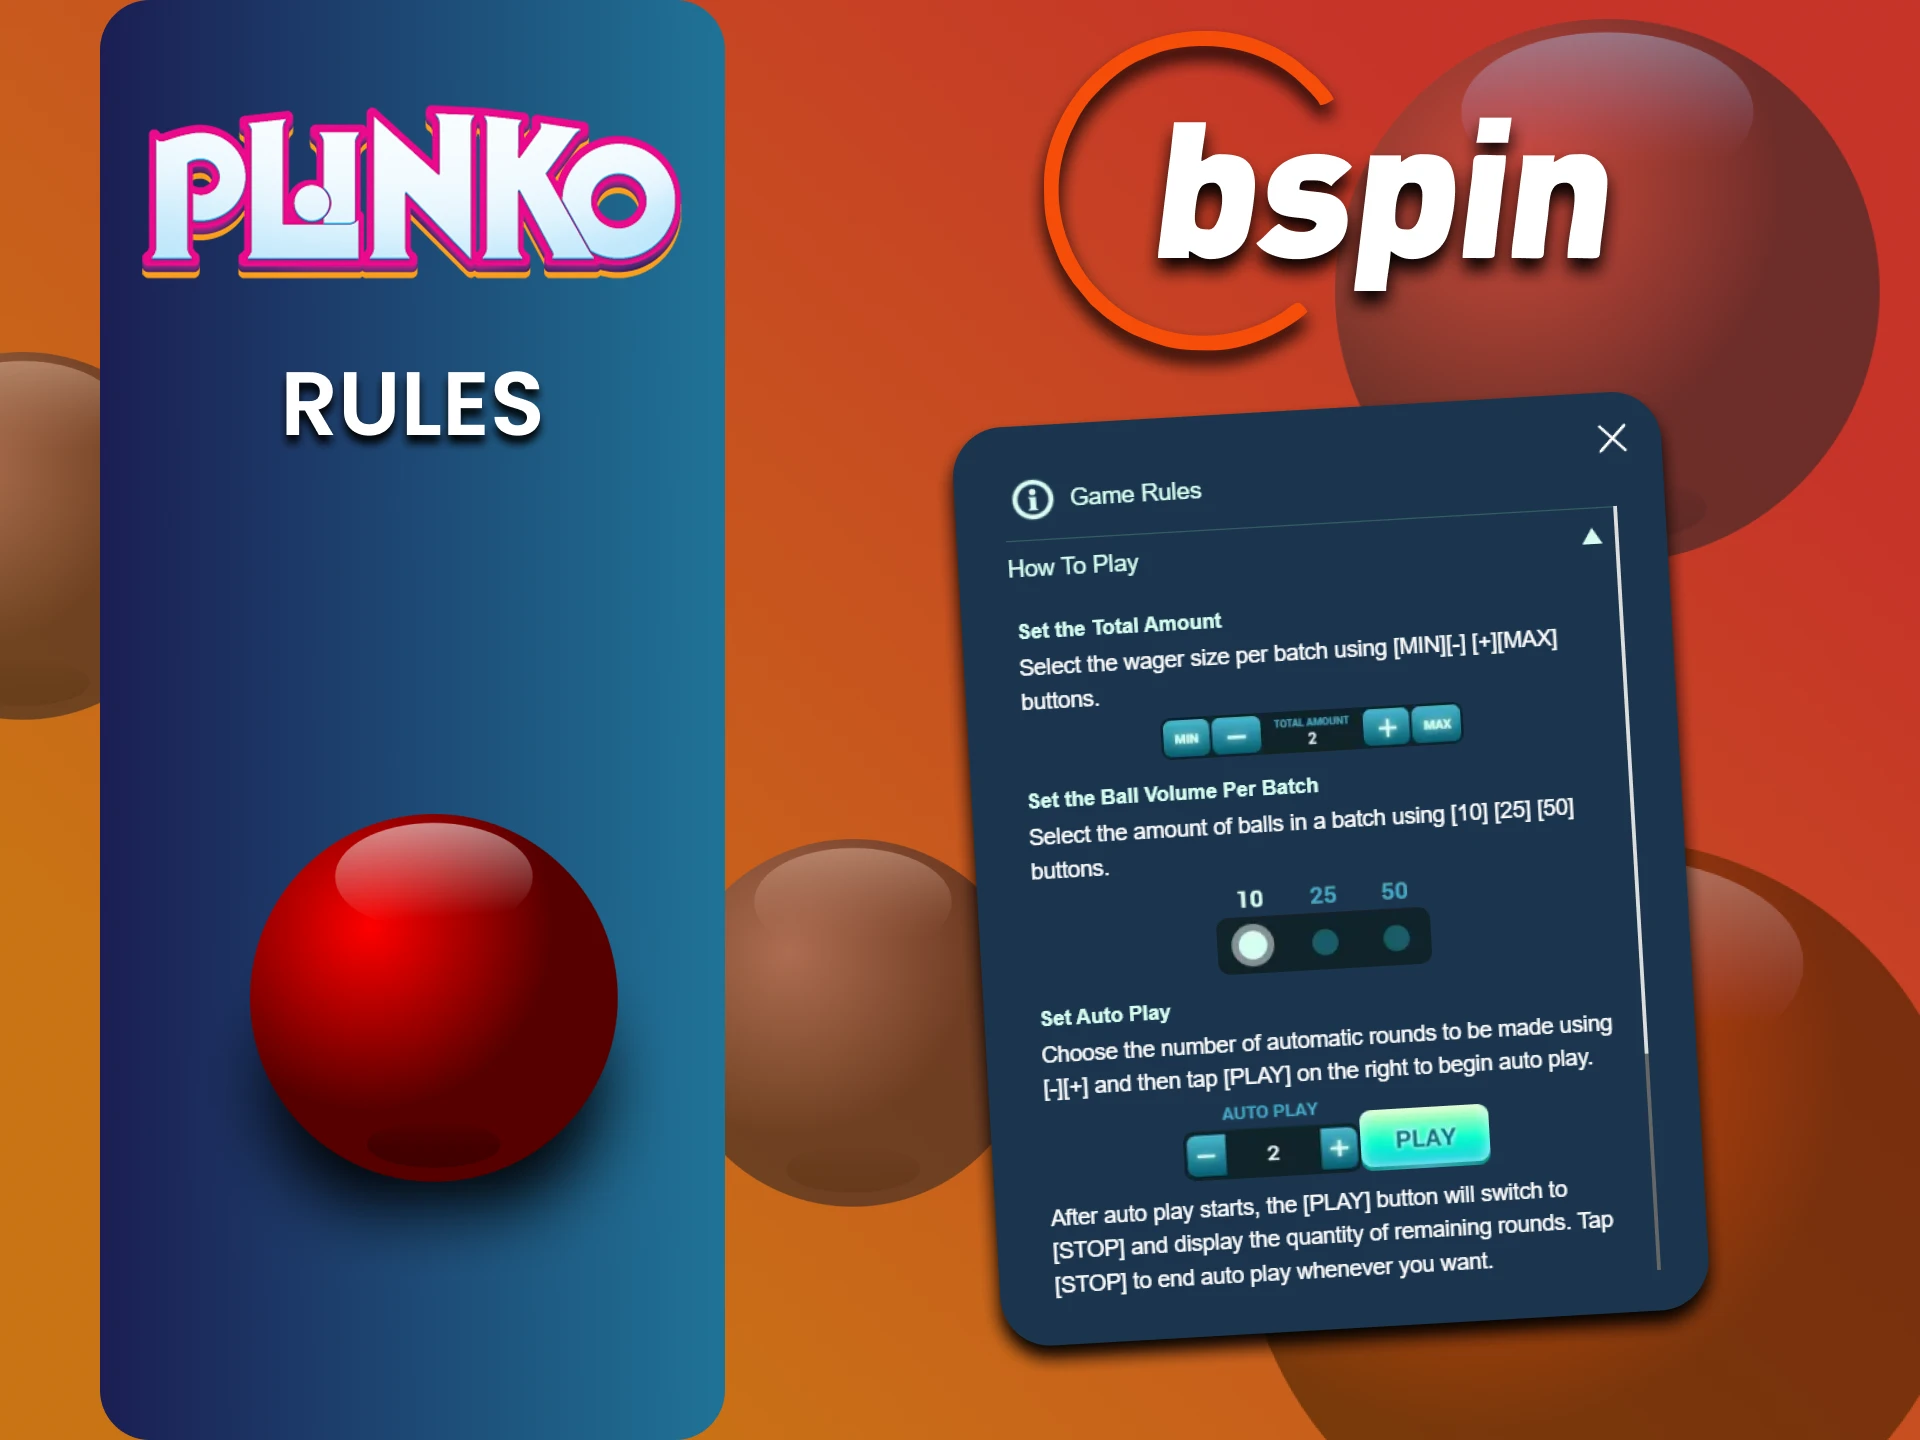 We will tell you the rules of playing Plinko on Bspin.